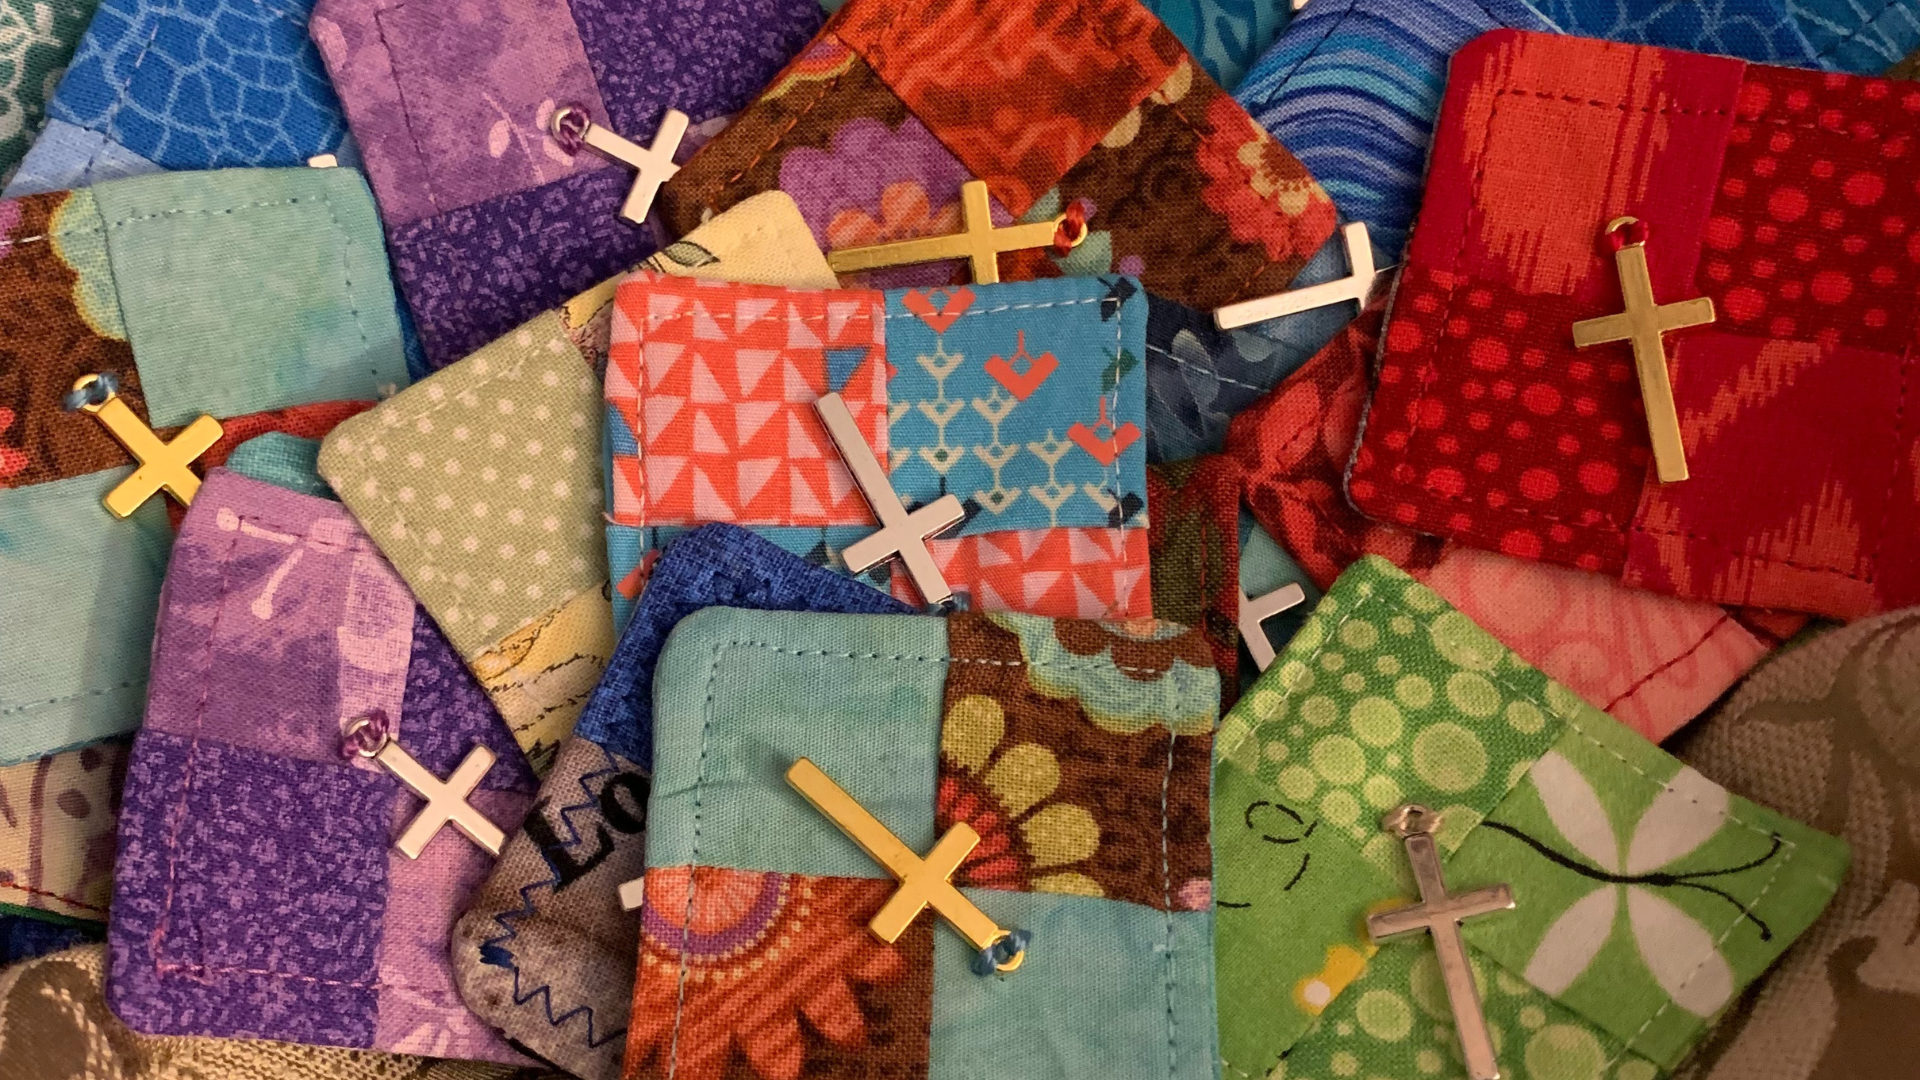 Colorful pocket prayer quilts with crosses